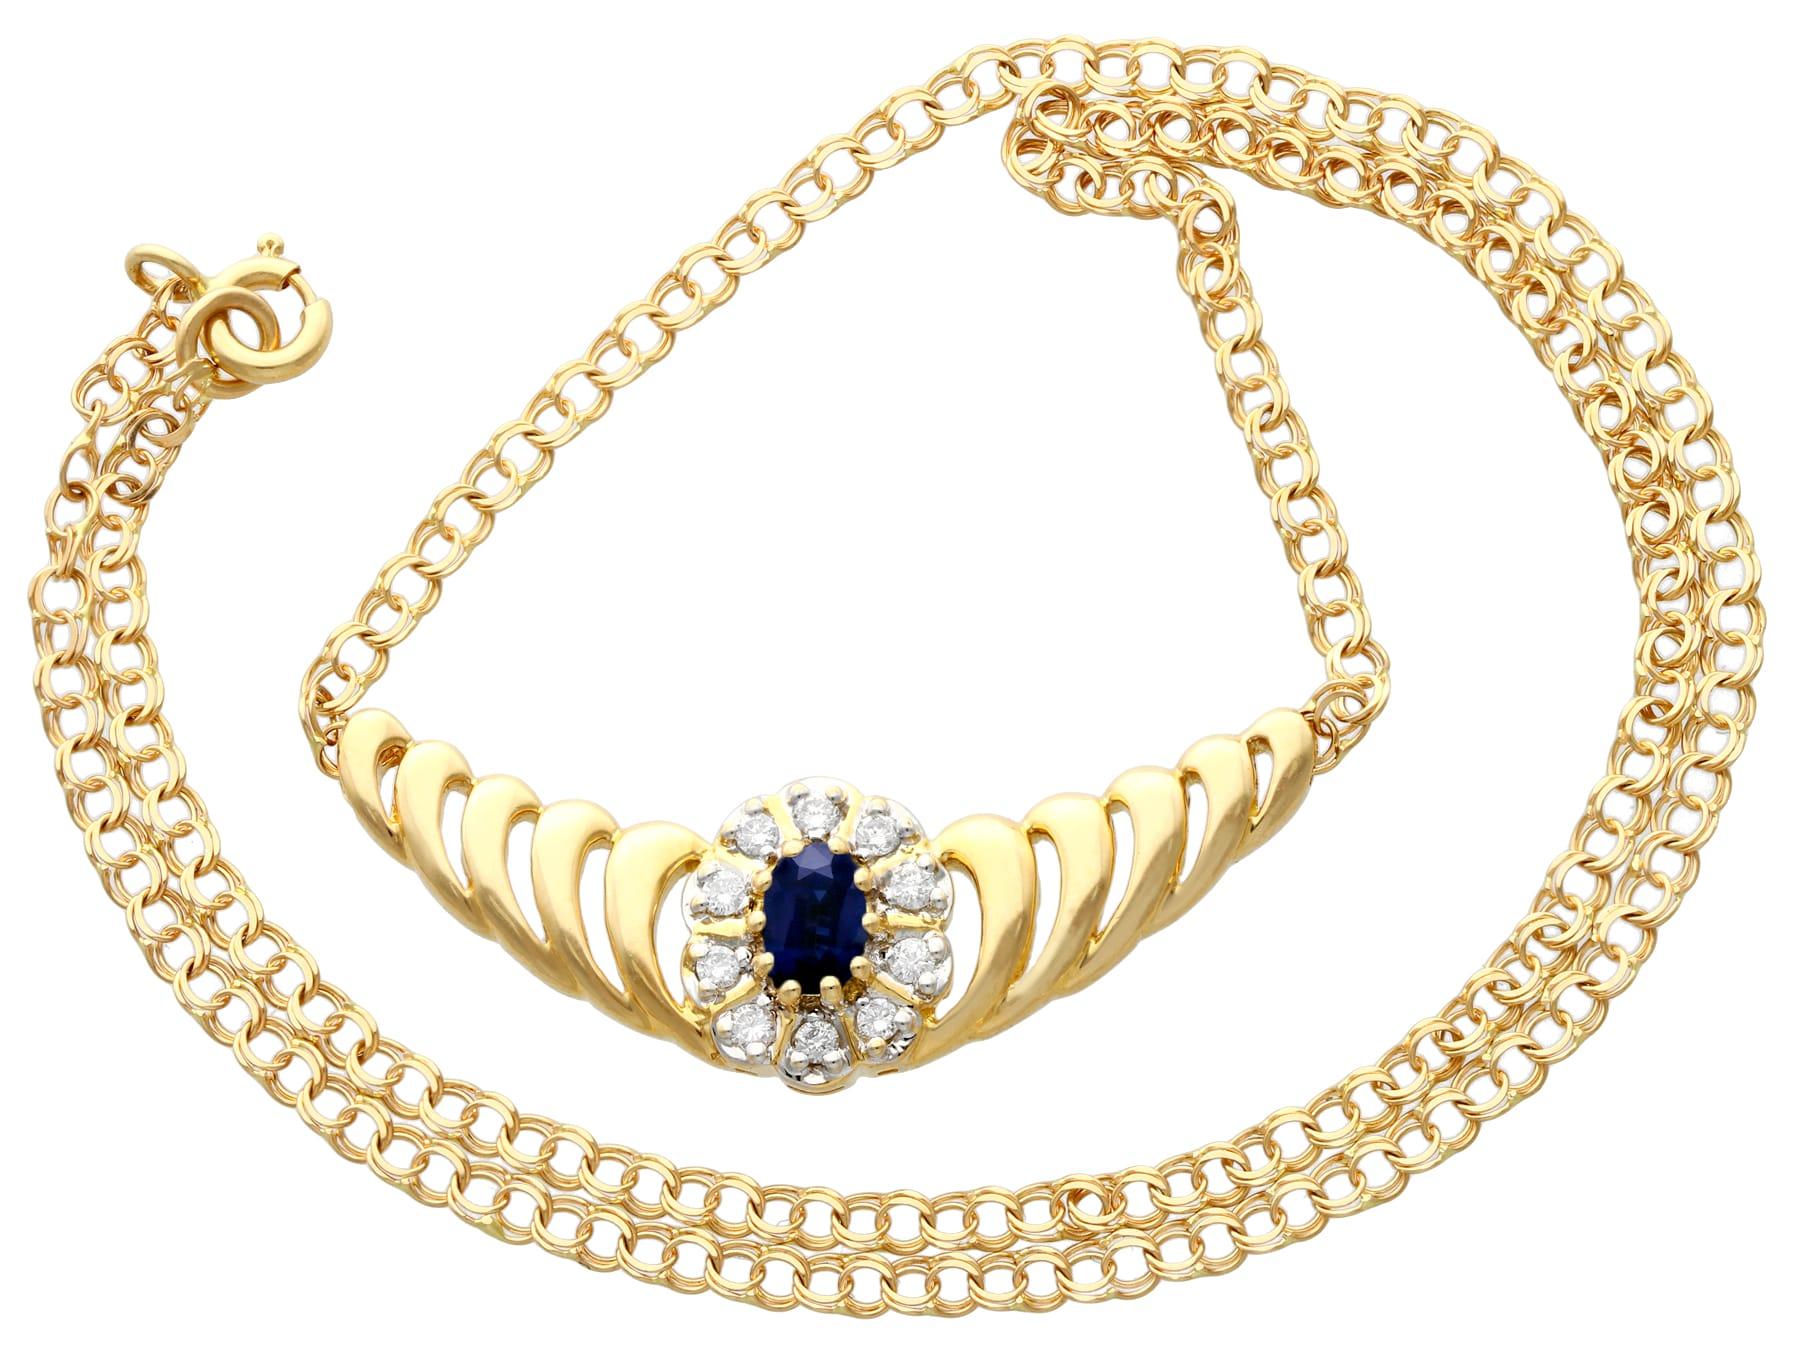 A fine and impressive 0.36 carat blue sapphire and 0.45 carat diamond, 18 karat yellow gold necklace; part of our contemporary and estate jewelry collections

This fine contemporary sapphire and diamond necklace has been crafted in 18k yellow